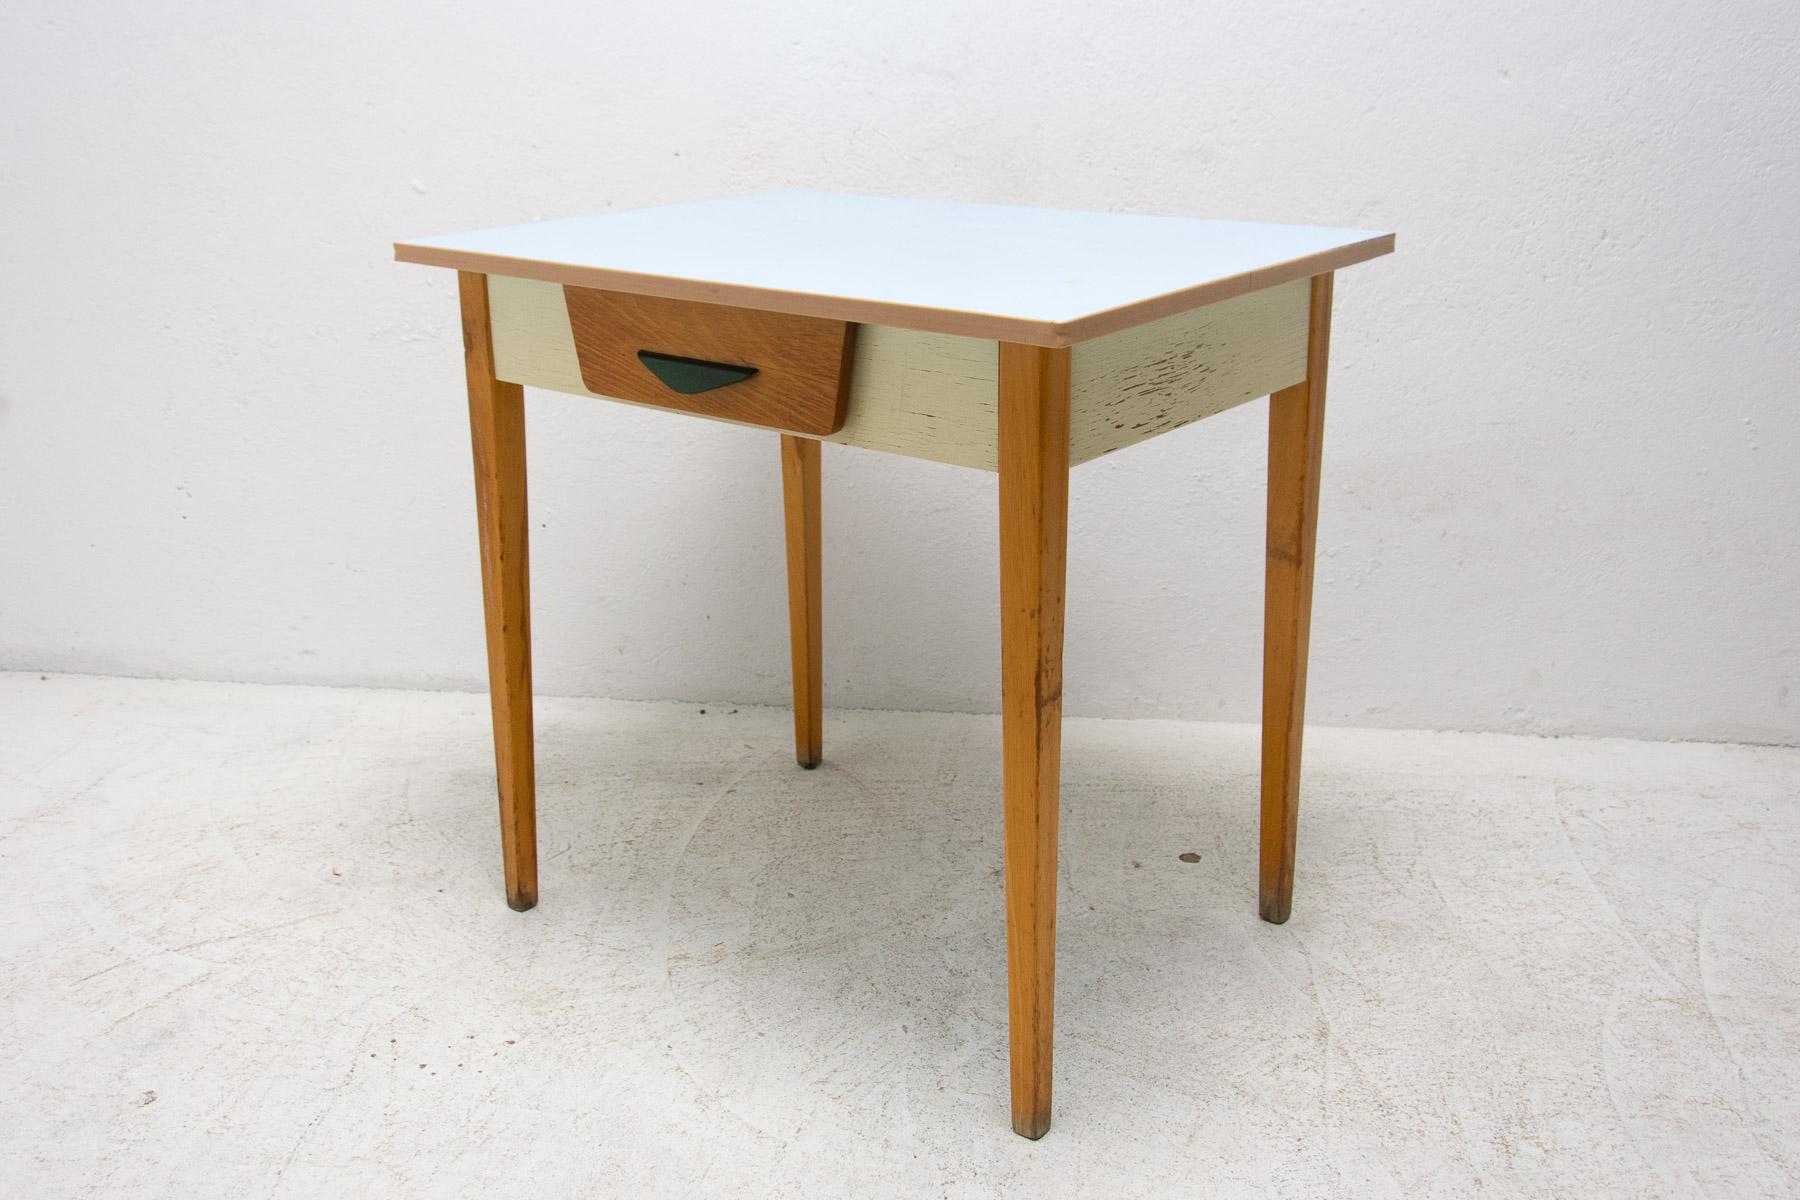 Mid century side table with one drawer. It was made in the former Czechoslovakia in the 1960´s. The table is made of wood and formica and painted in ivory. Overall is in good Vintage condition, shows signs of age and using.

Measures: Height: 75